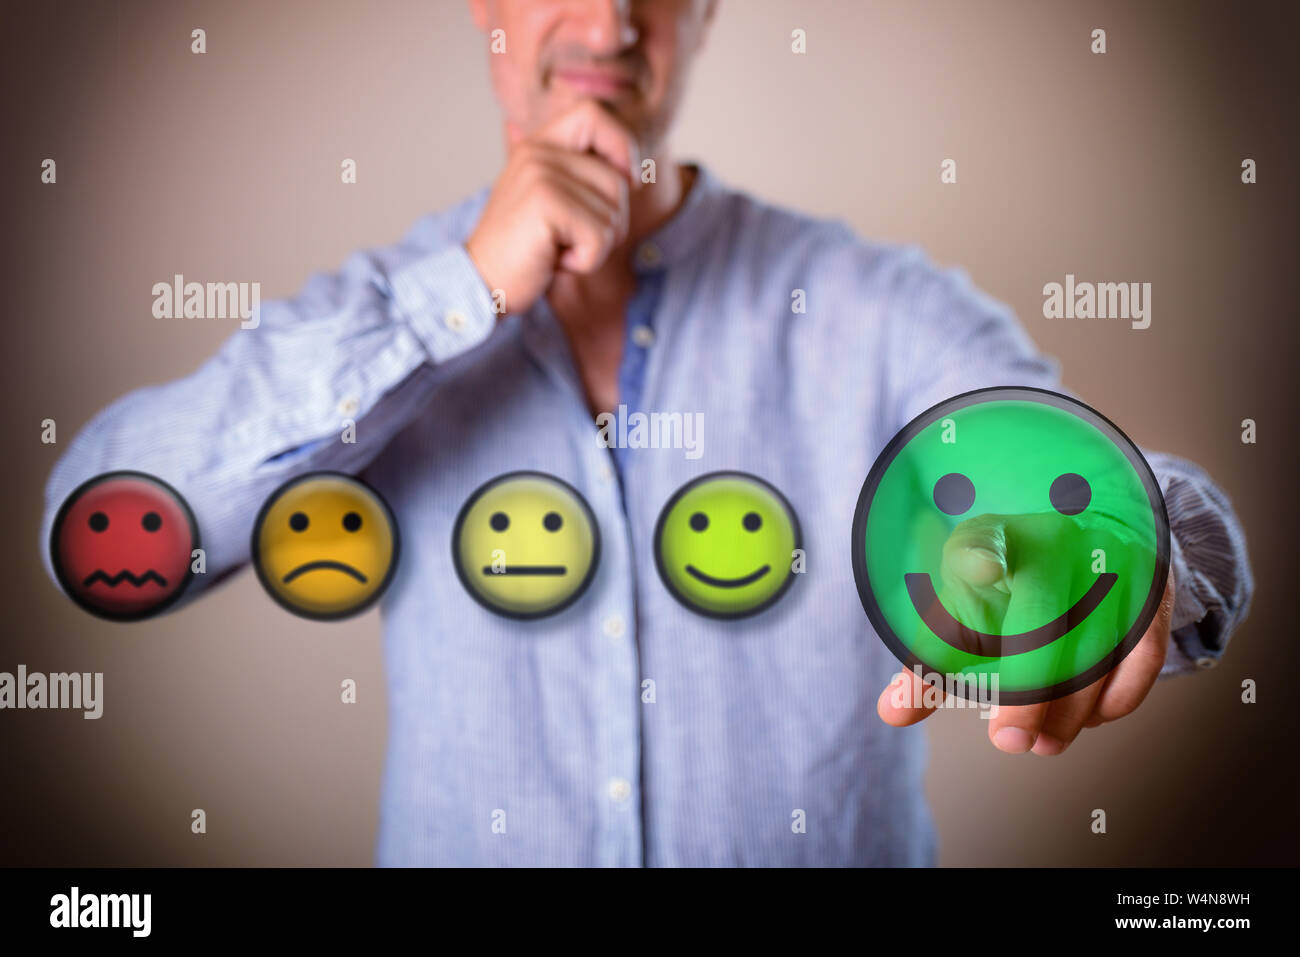 Concept of person deciding positively with colorful emoticon illustrations. Horizontal composition. Front view. Stock Photo